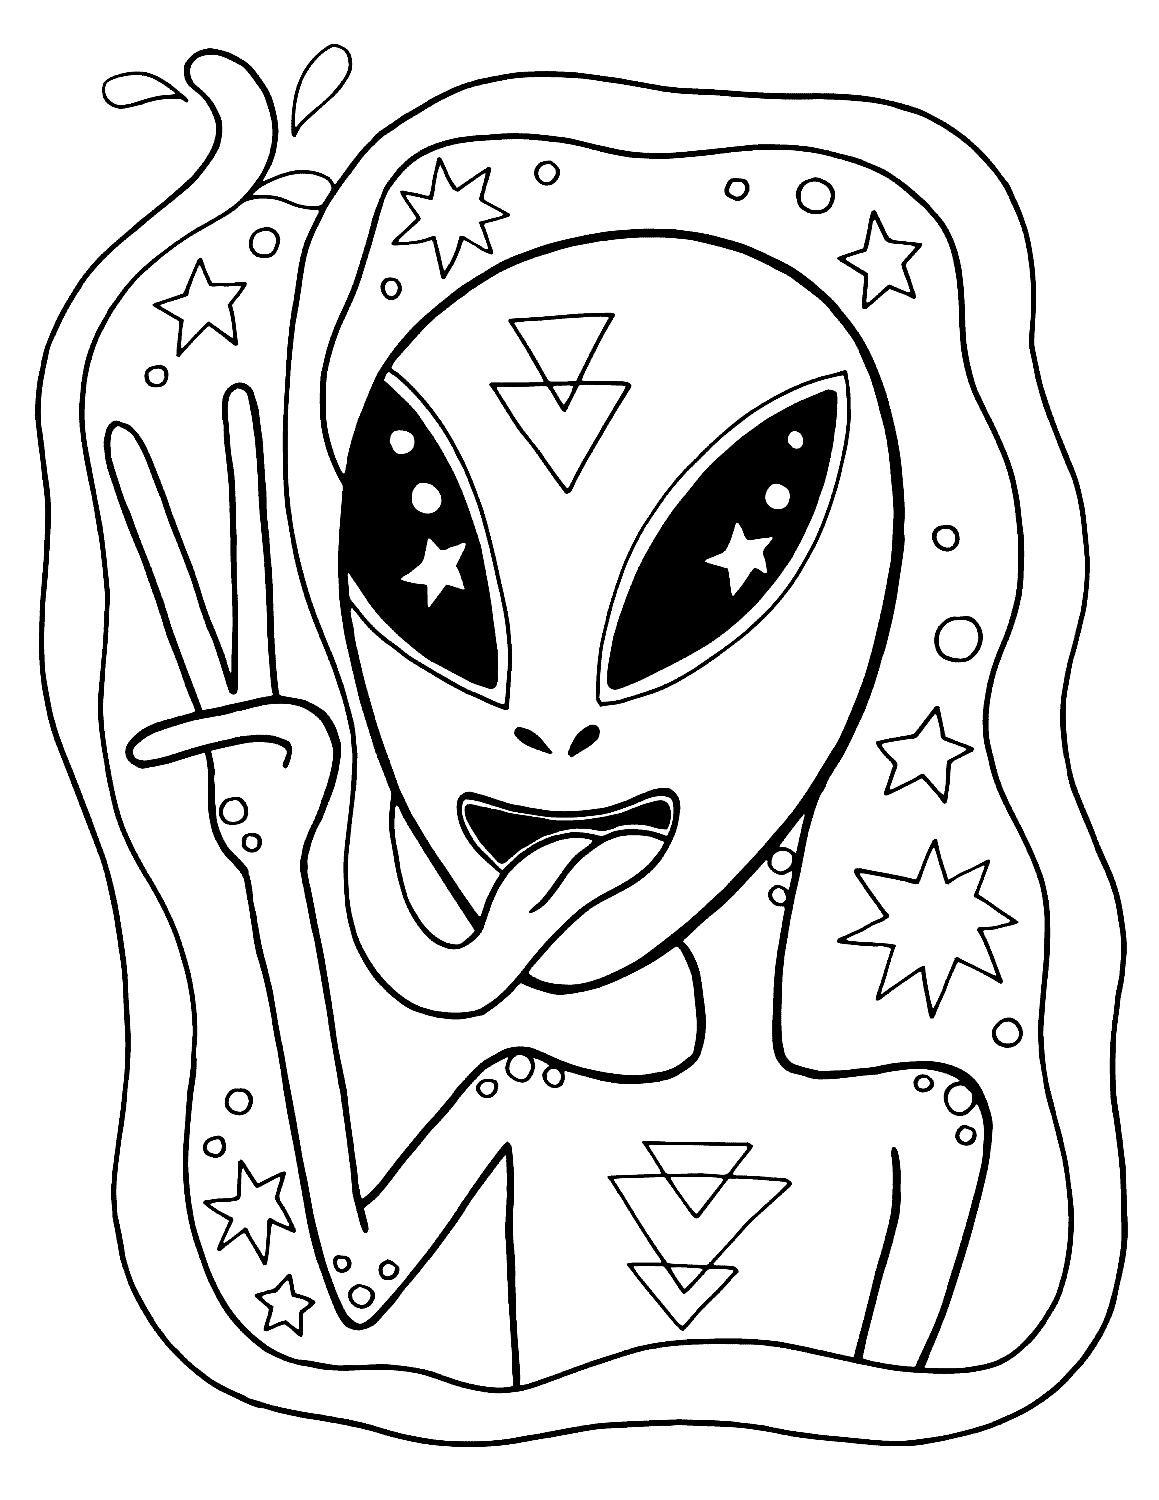 Printable Trippy Alien Coloring Pages